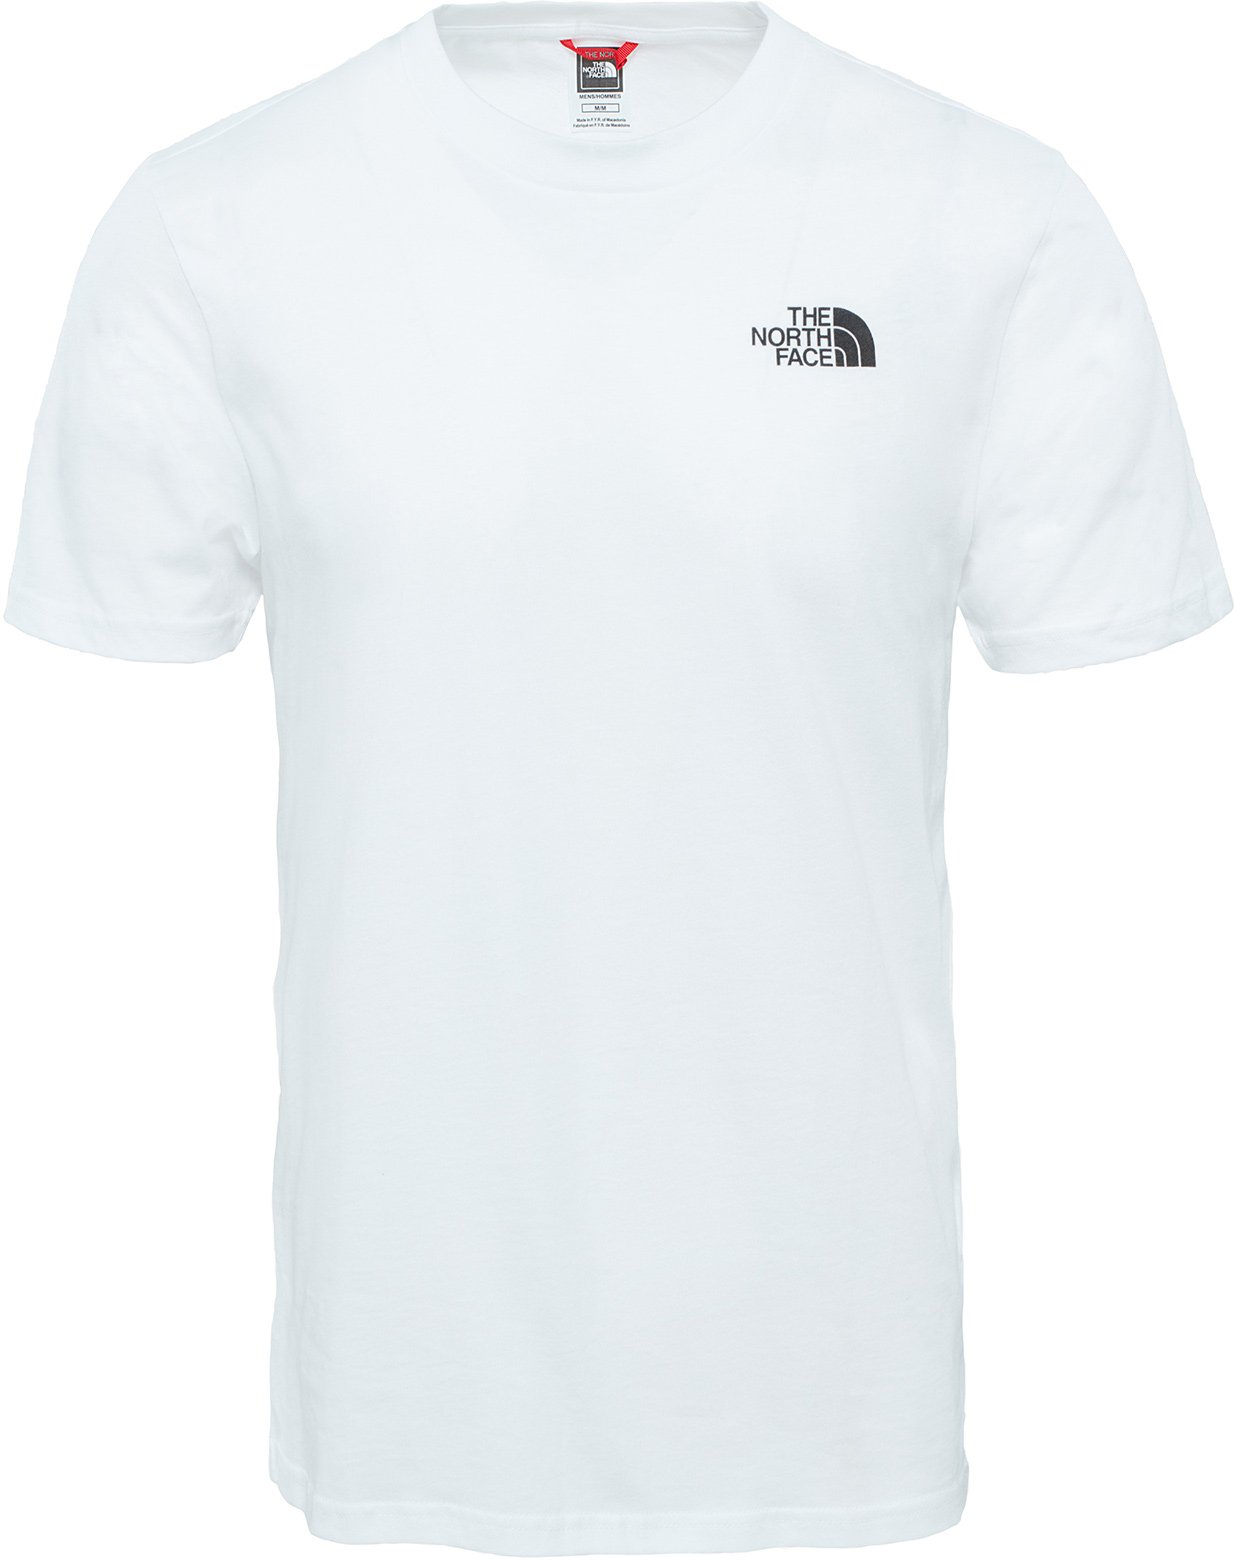 The North Face Men's Simple Dome T-Shirt L